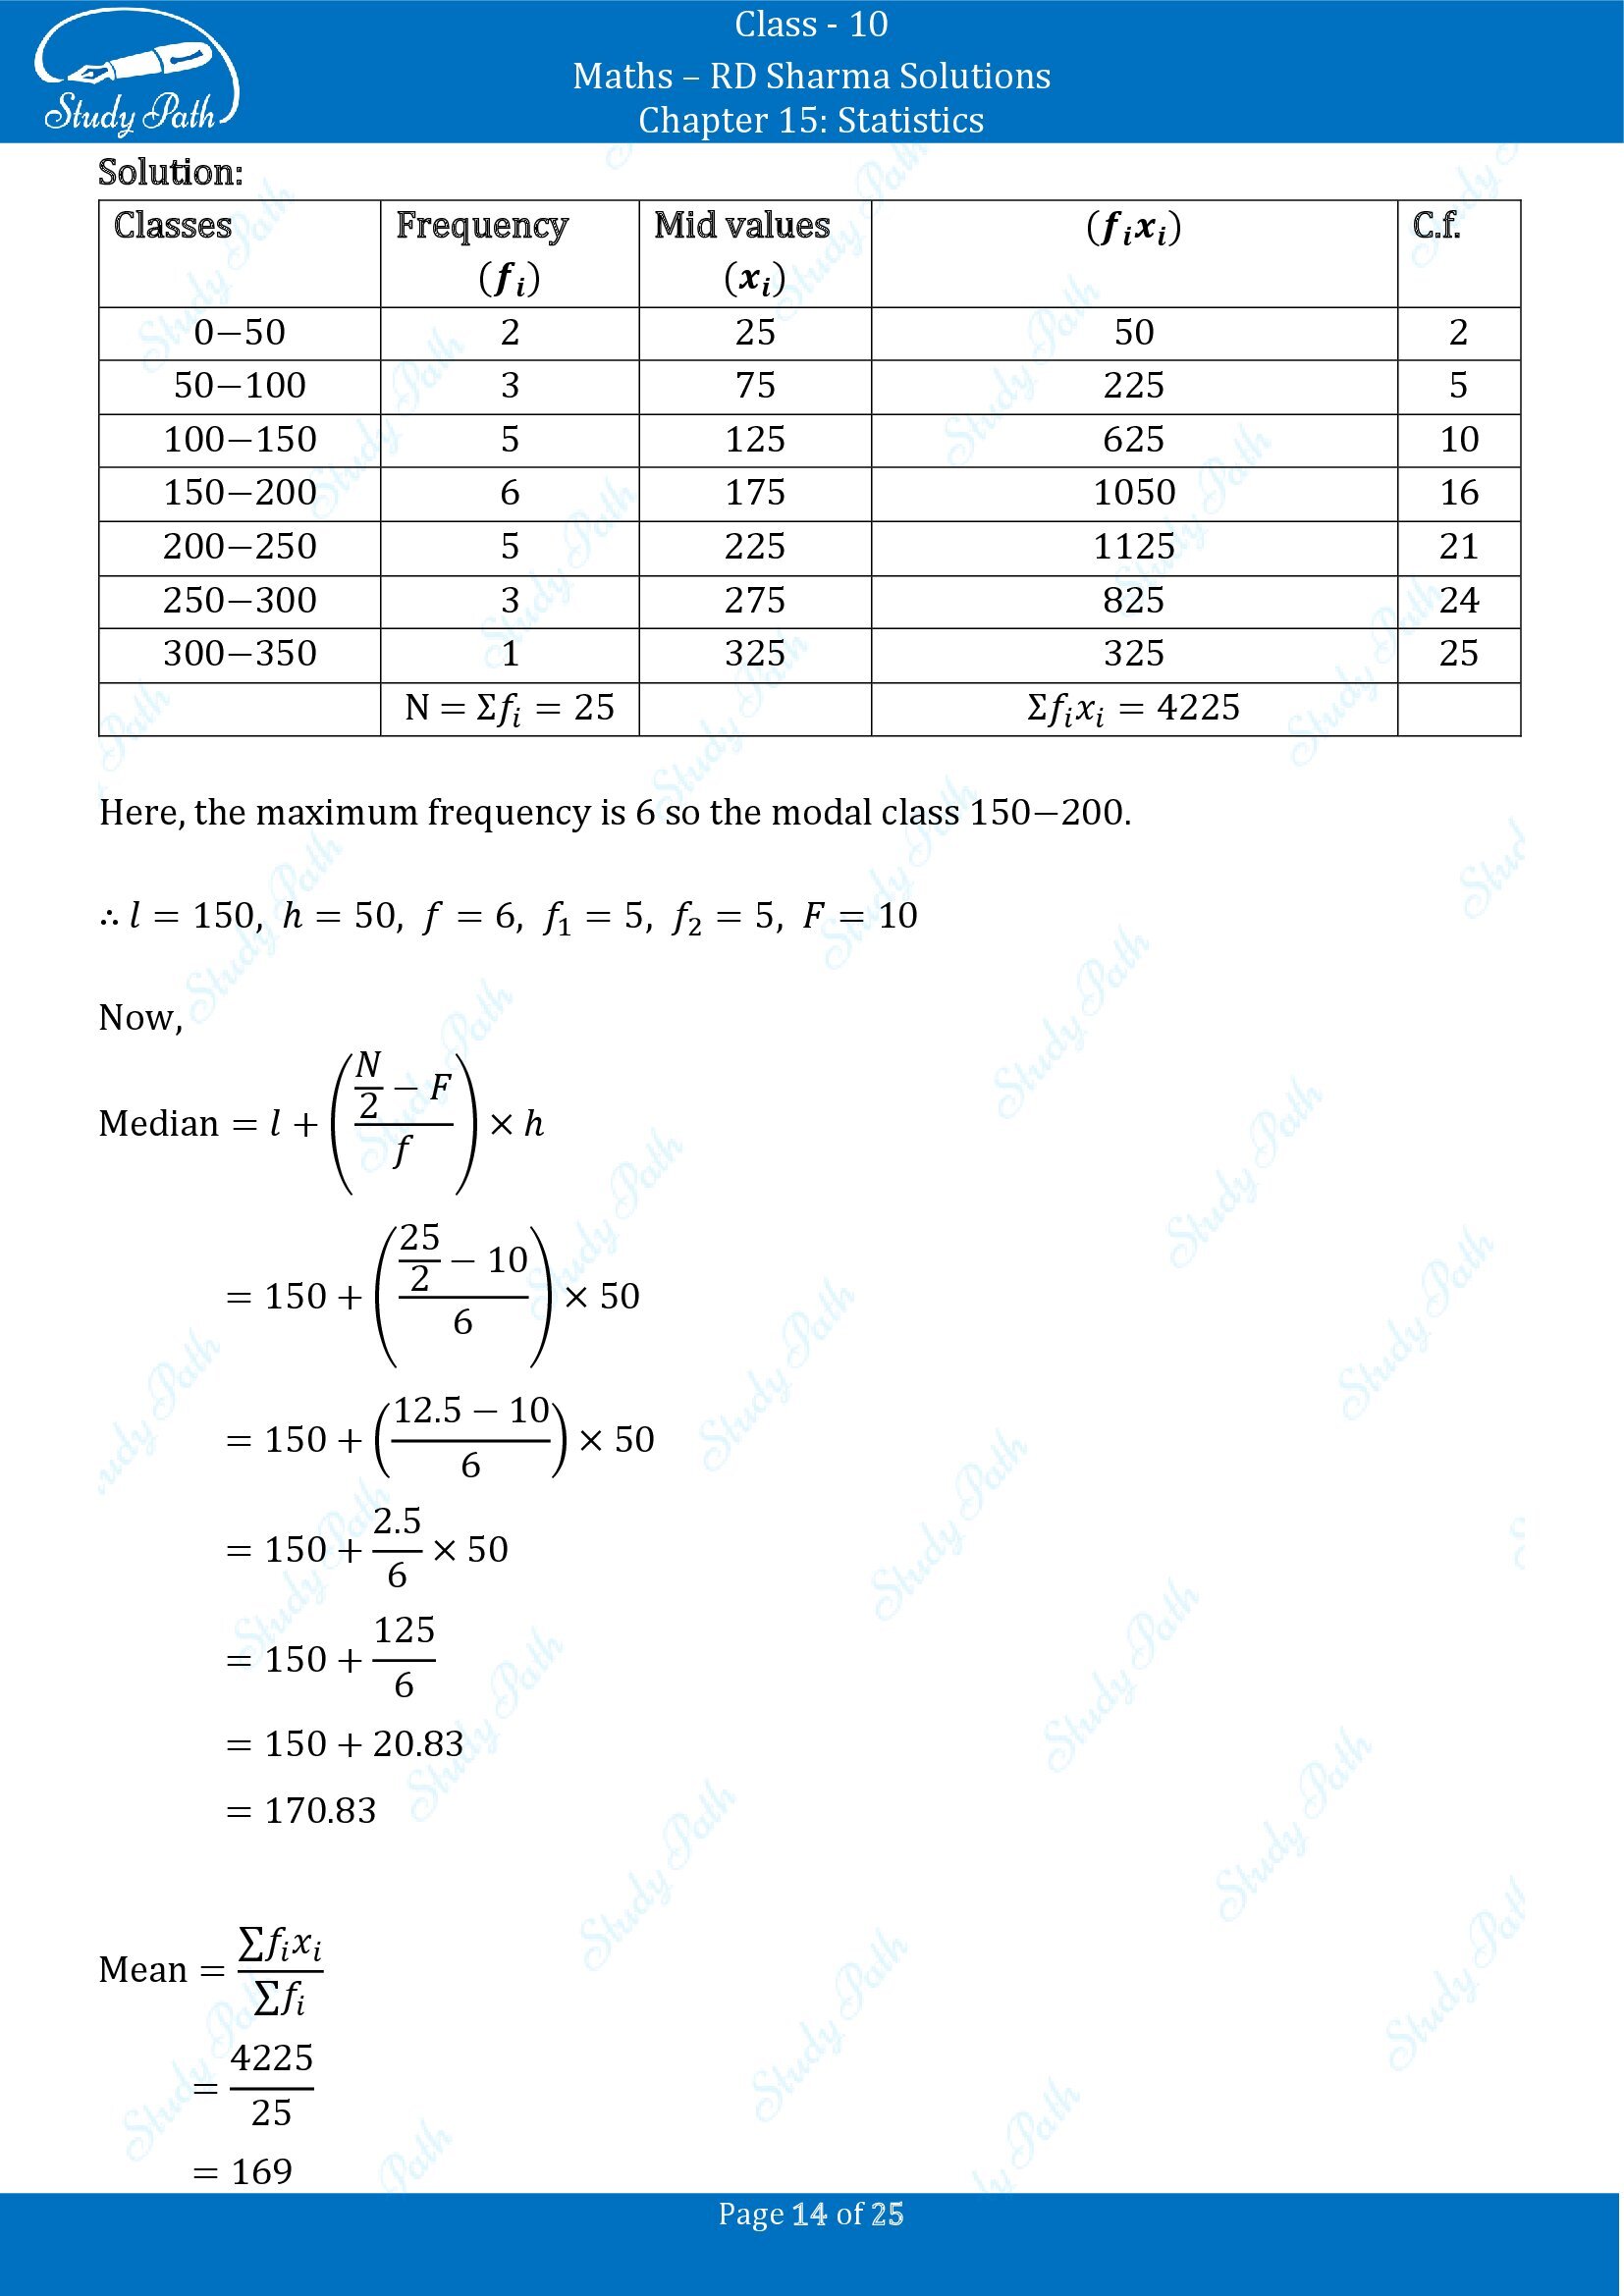 RD Sharma Solutions Class 10 Chapter 15 Statistics Exercise 15.5 00014